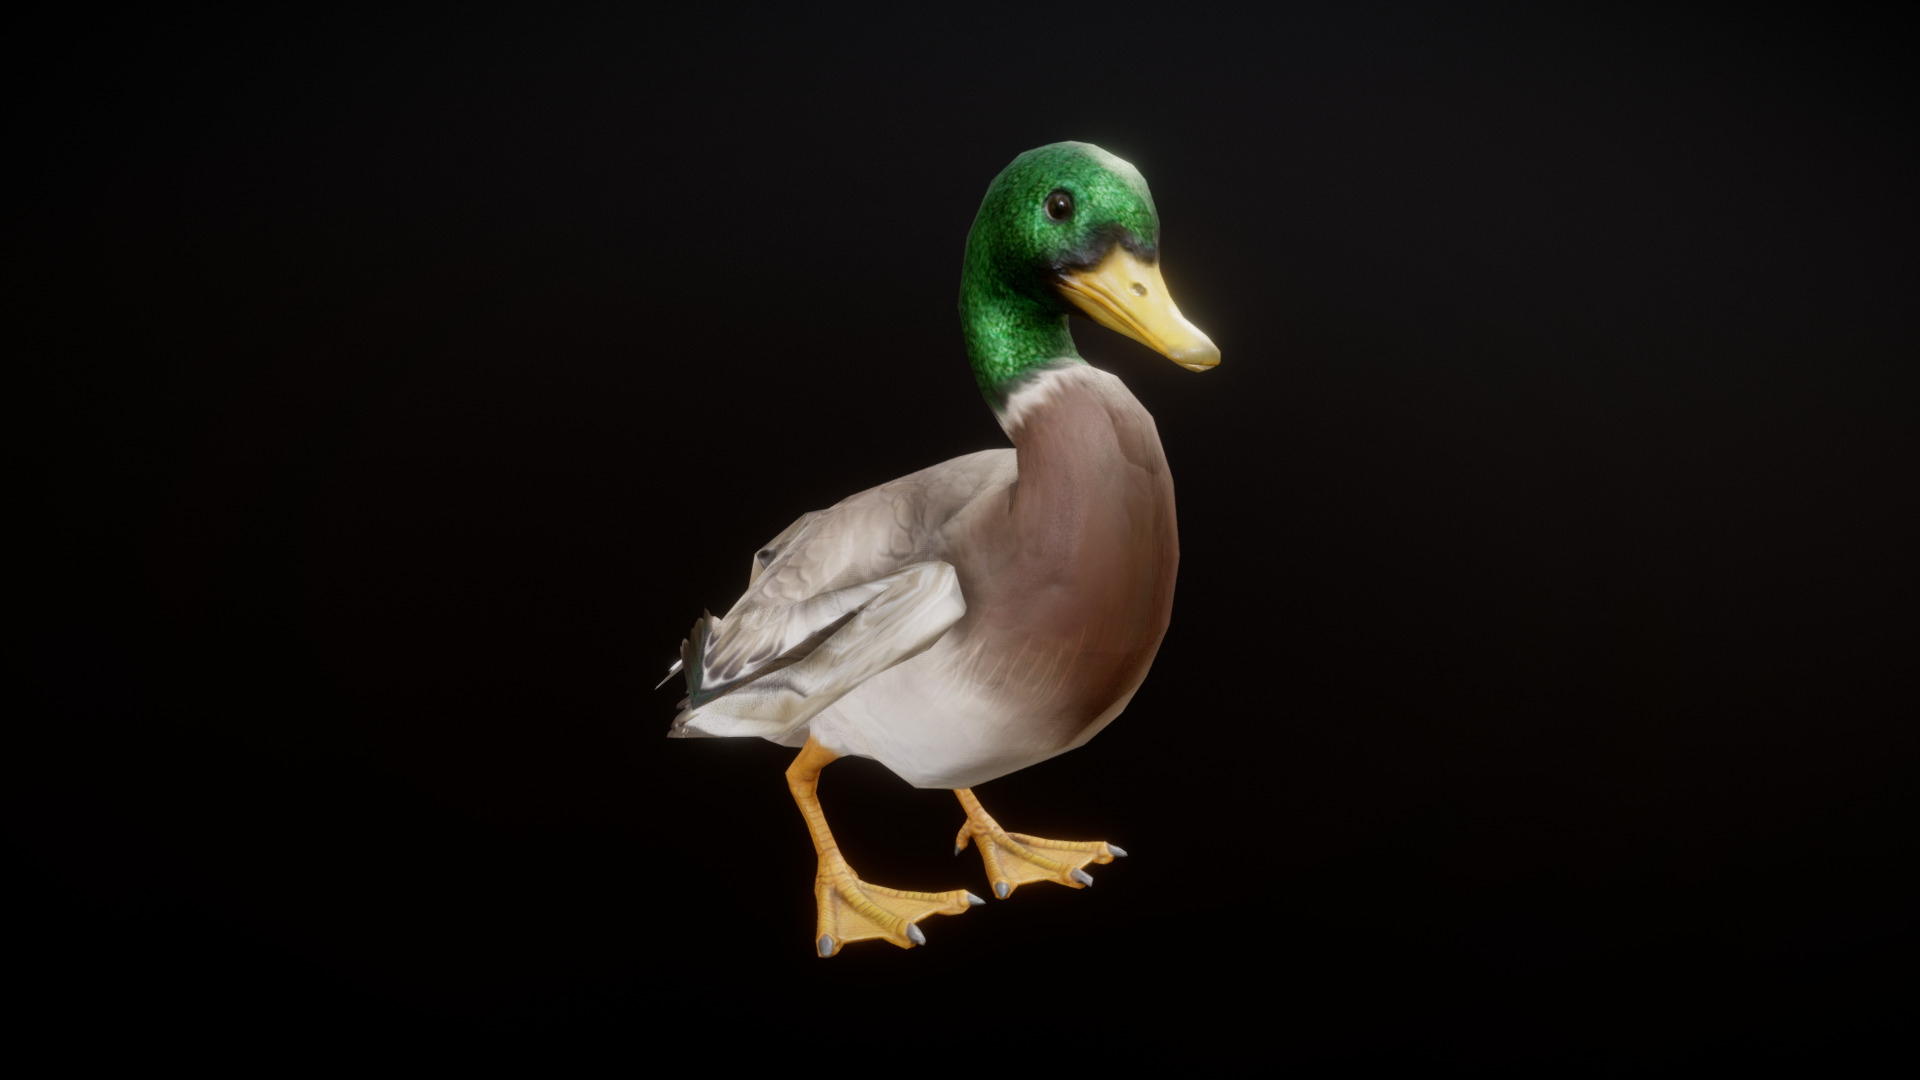 3D model DUCK ANIMATION - This is a 3D model of the DUCK ANIMATION. The 3D model is about a duck with a green head.